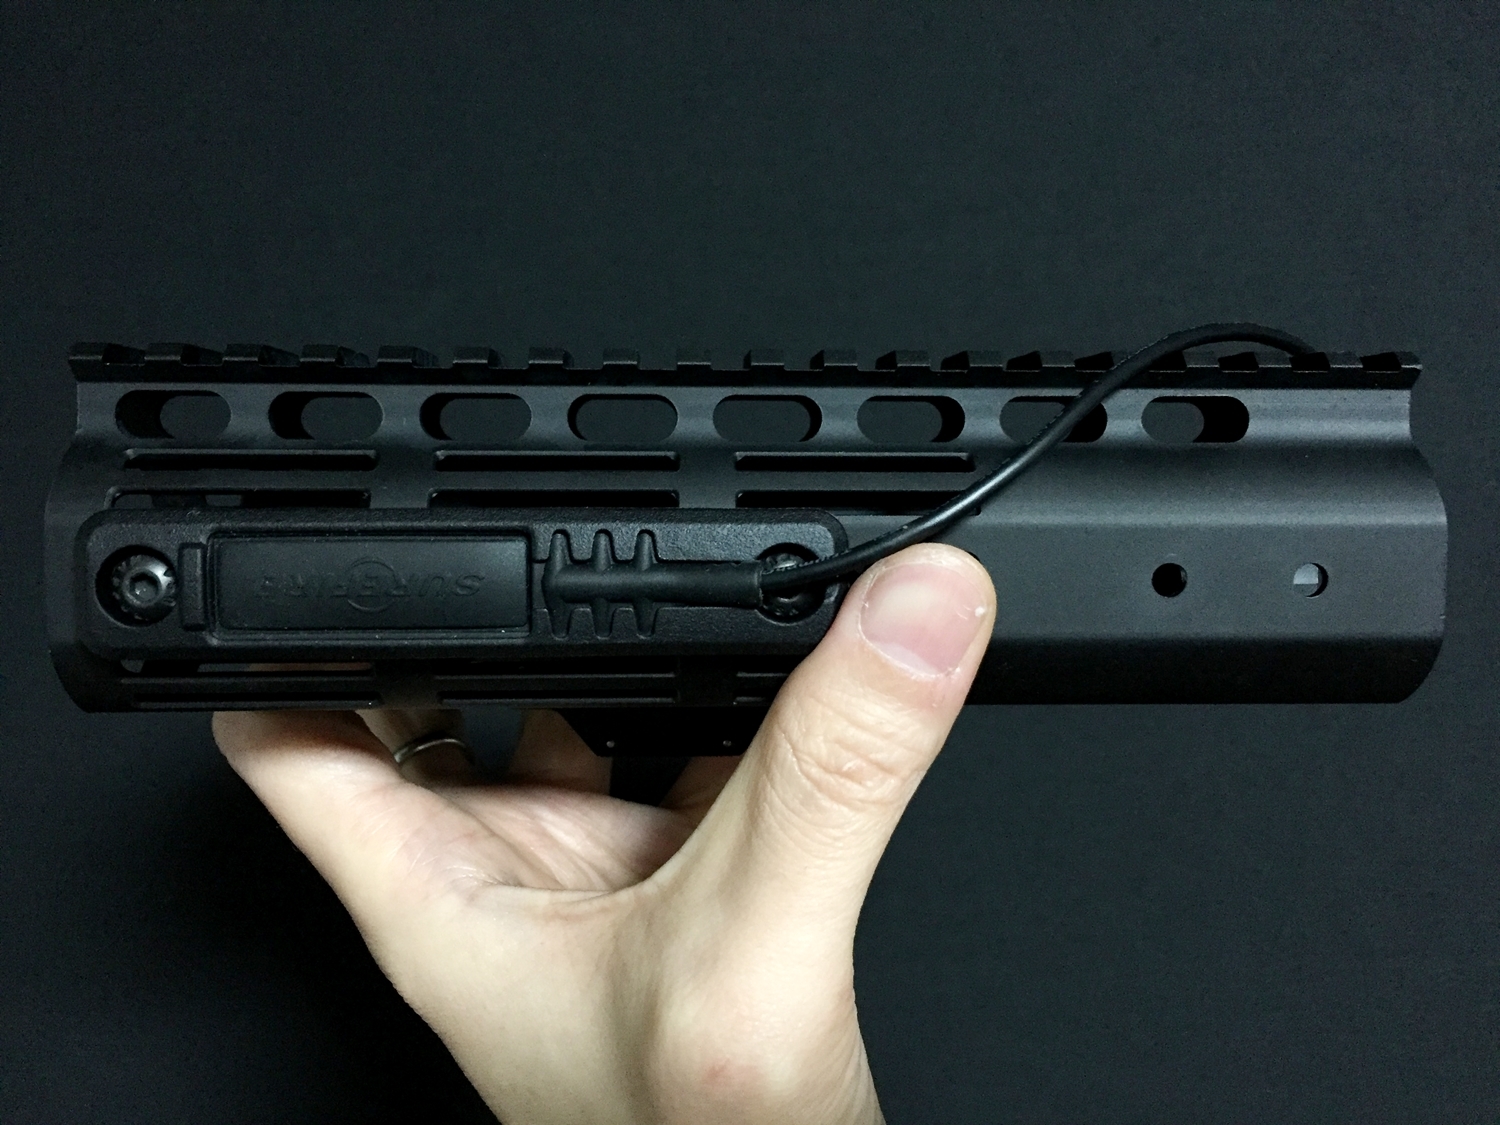 24 M-LOK MAGPUL Tape Switch Mounting Plate for Surefire ST Polymer MADE IN USA マグプル 実物 本家 テープ リモート スイッチ